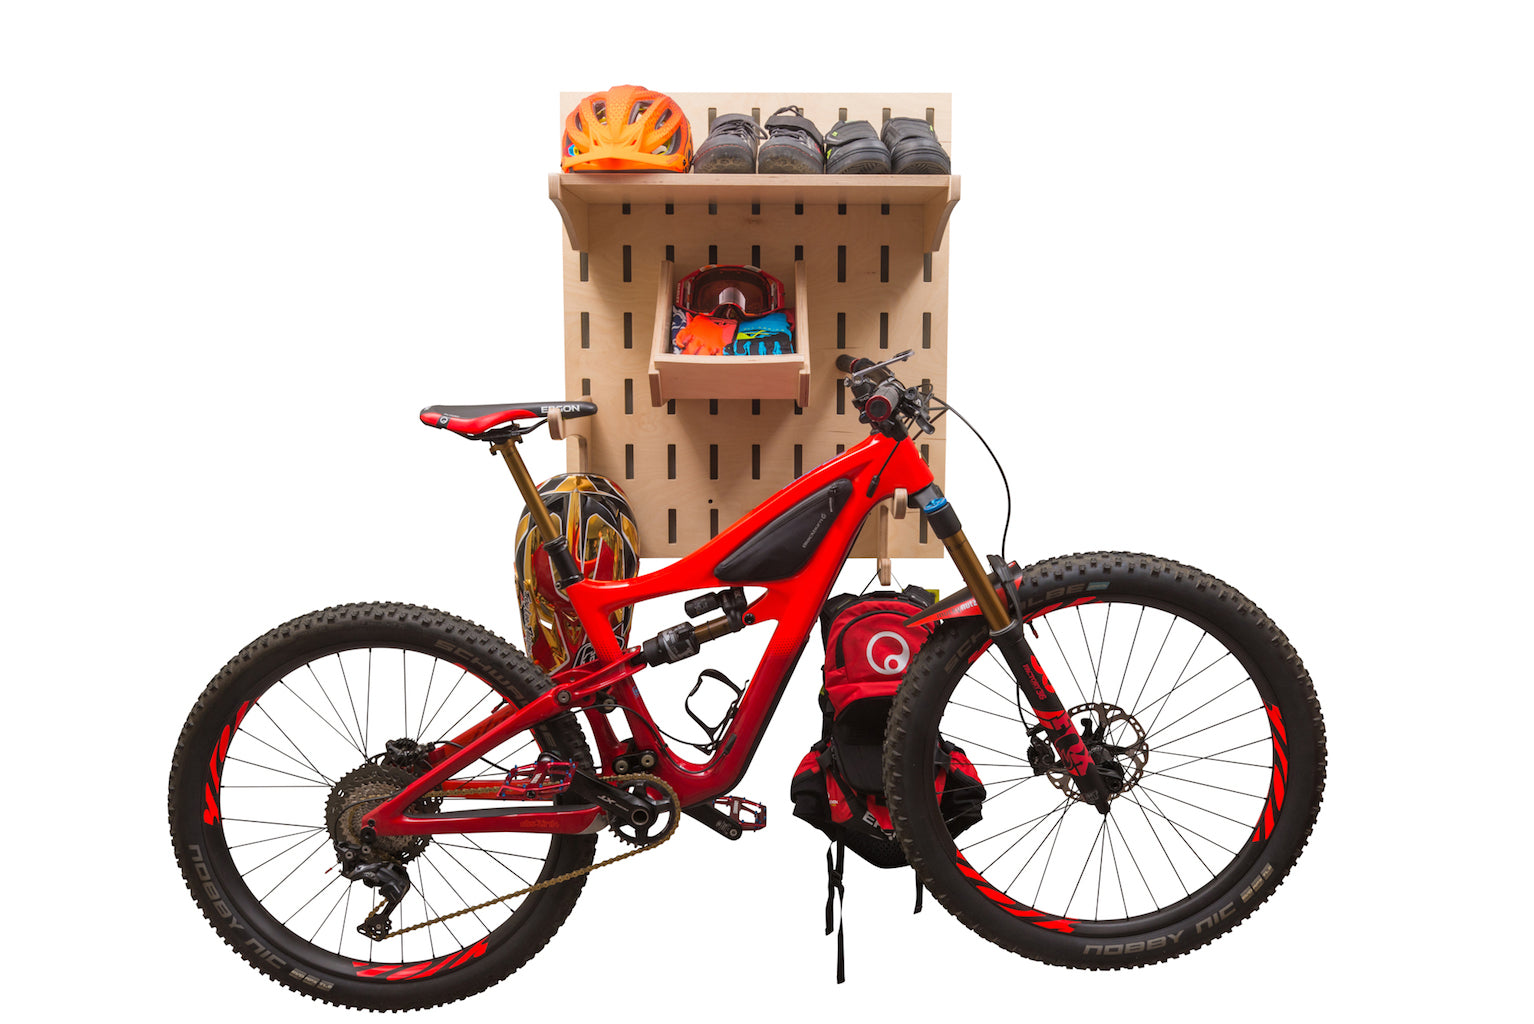 Bike rack for home organization or retail store fixture